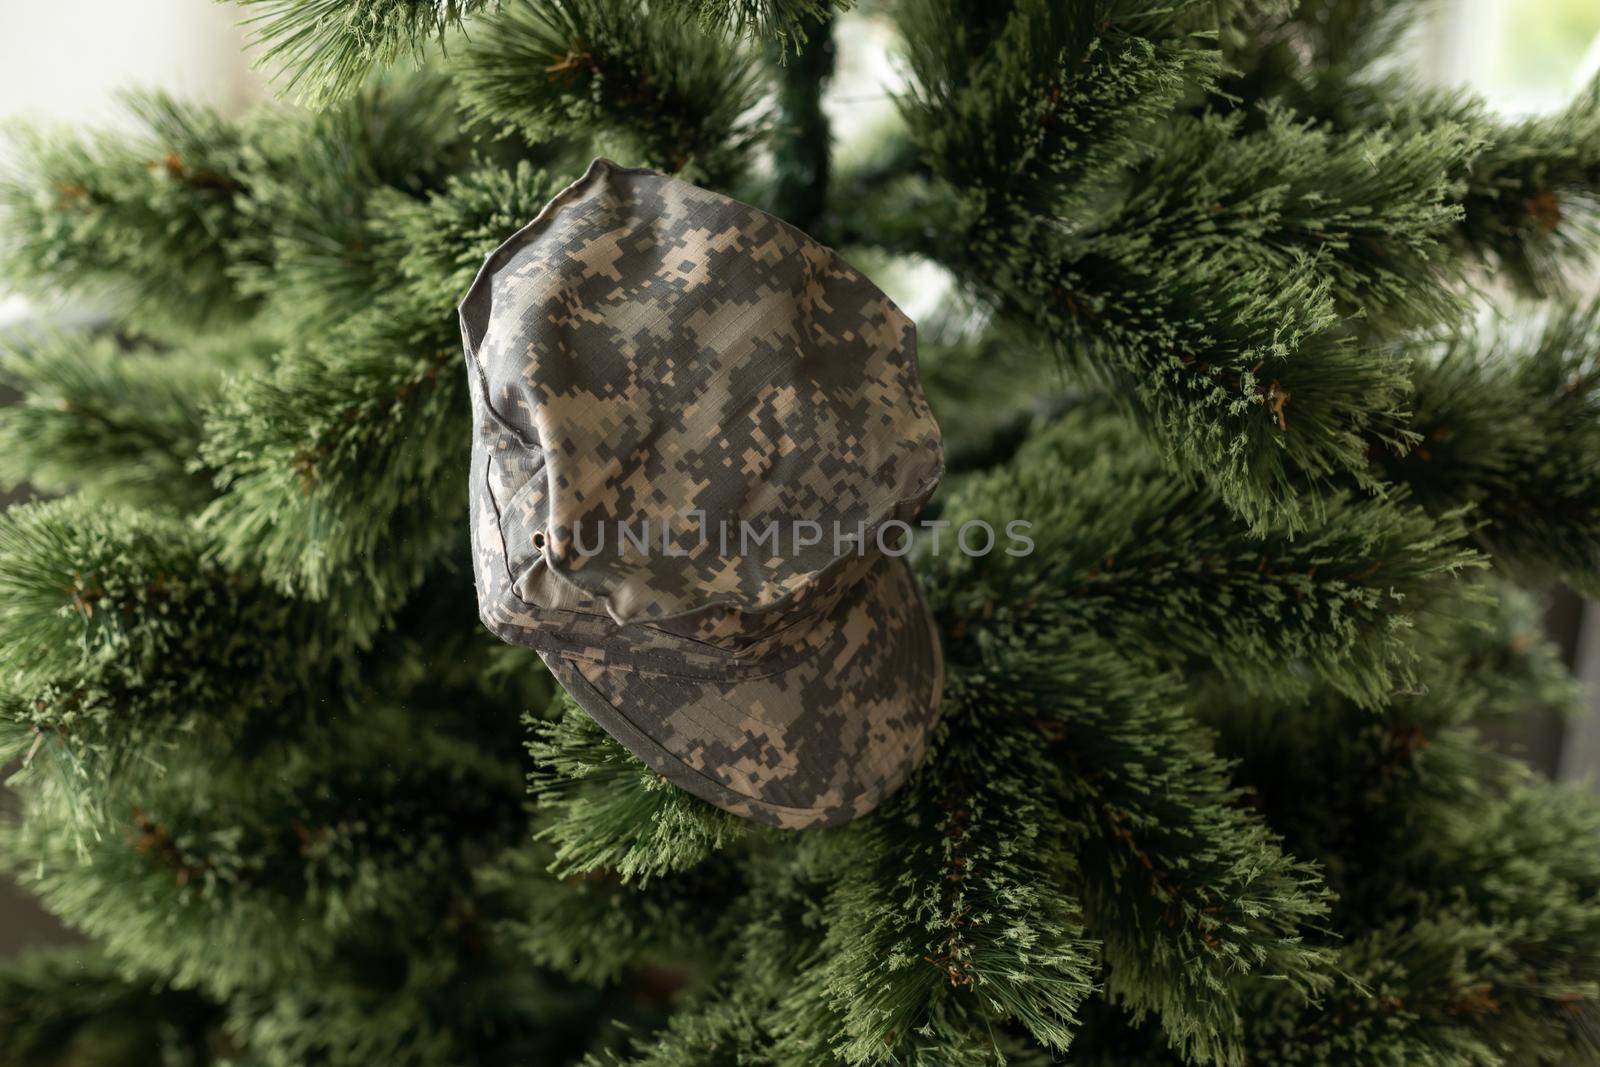 Christmas in the army. ball and gift box, military uniform, closeup view.